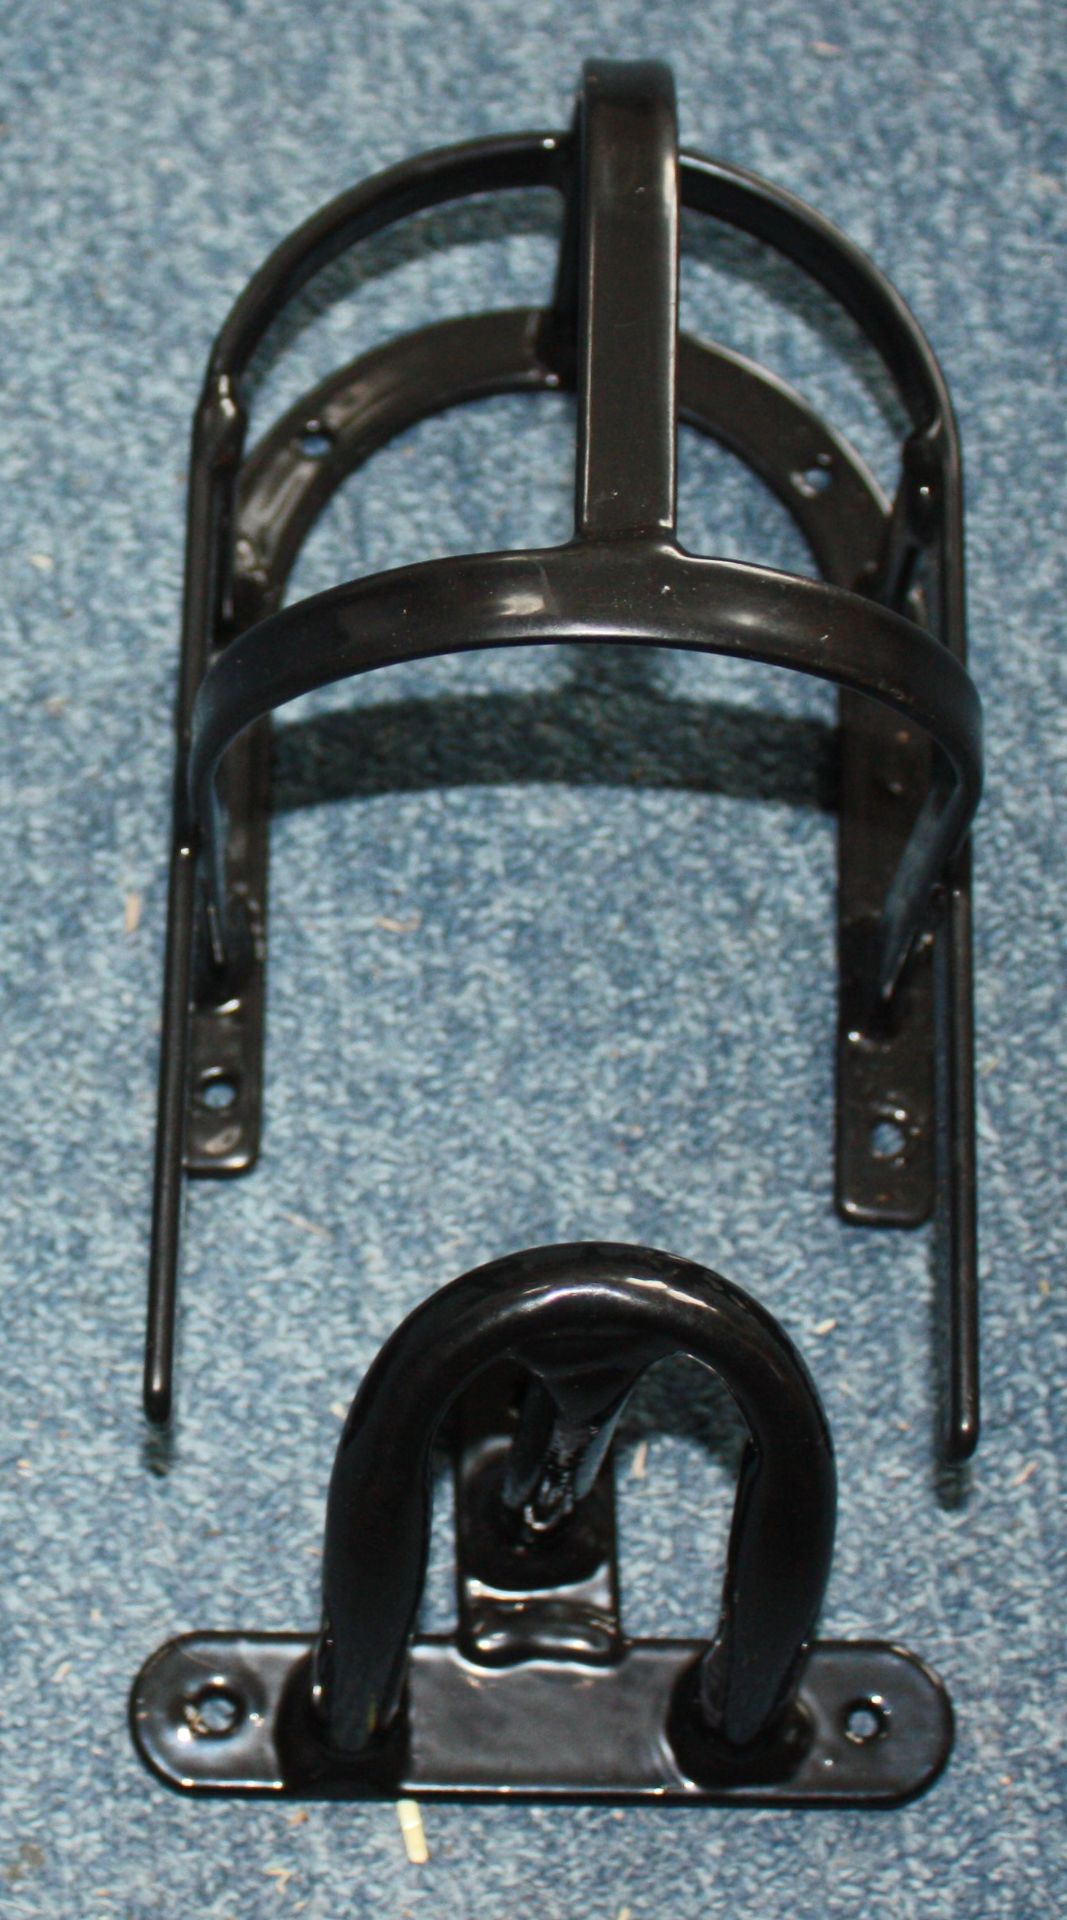 Bridle rack and rein rack by Stubbs